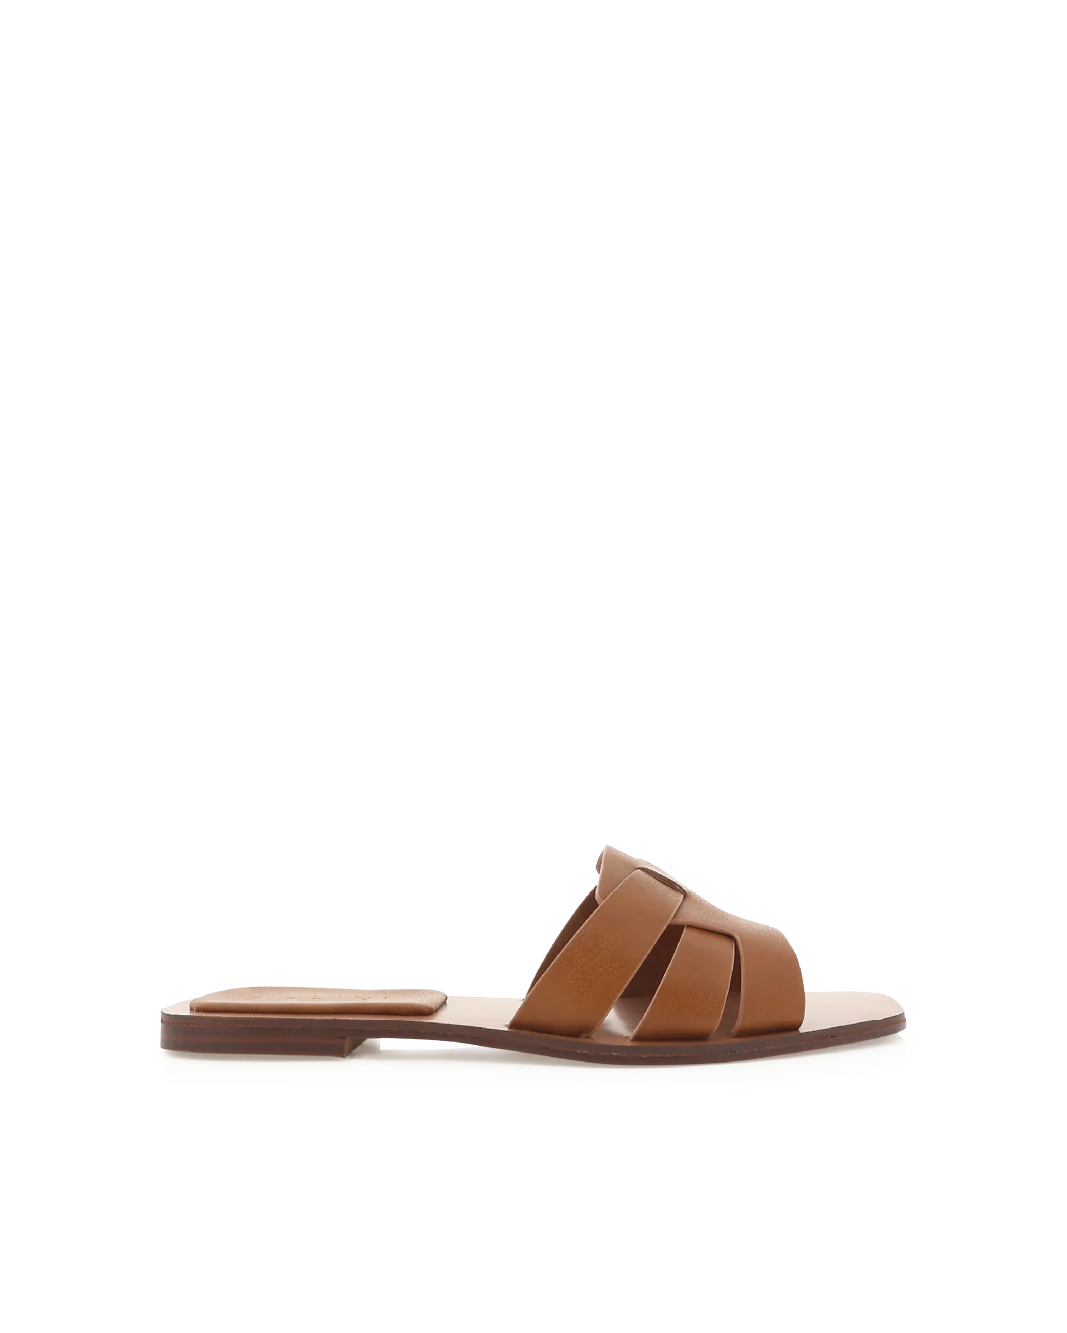 Ferna by Billini is a classic summer slide. Slide into summer with the ultimate easy-to-wear style.